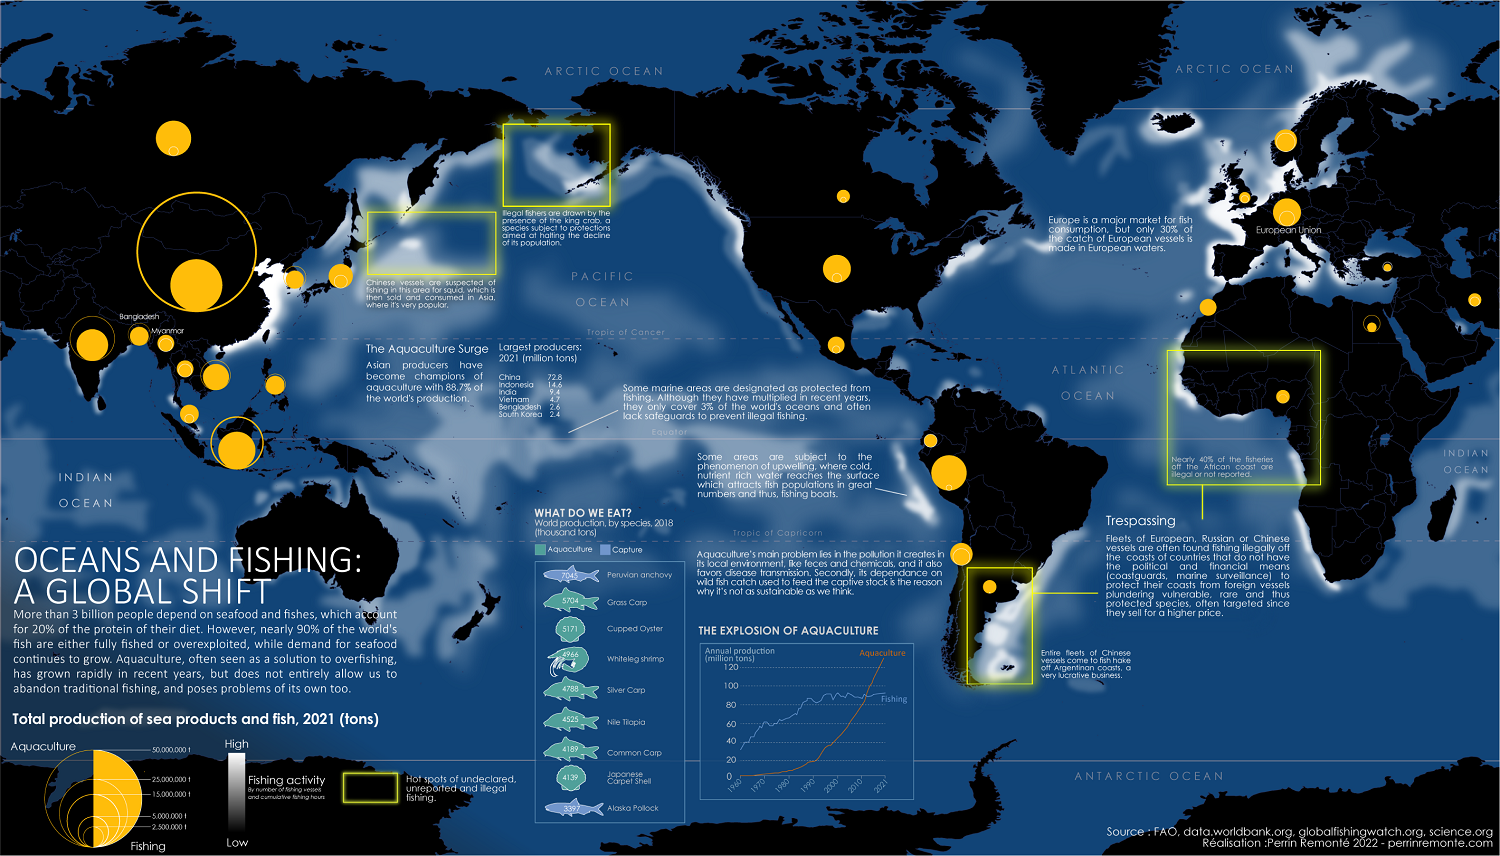 Mapped: Ocean Fishing and Aquaculture Around the World